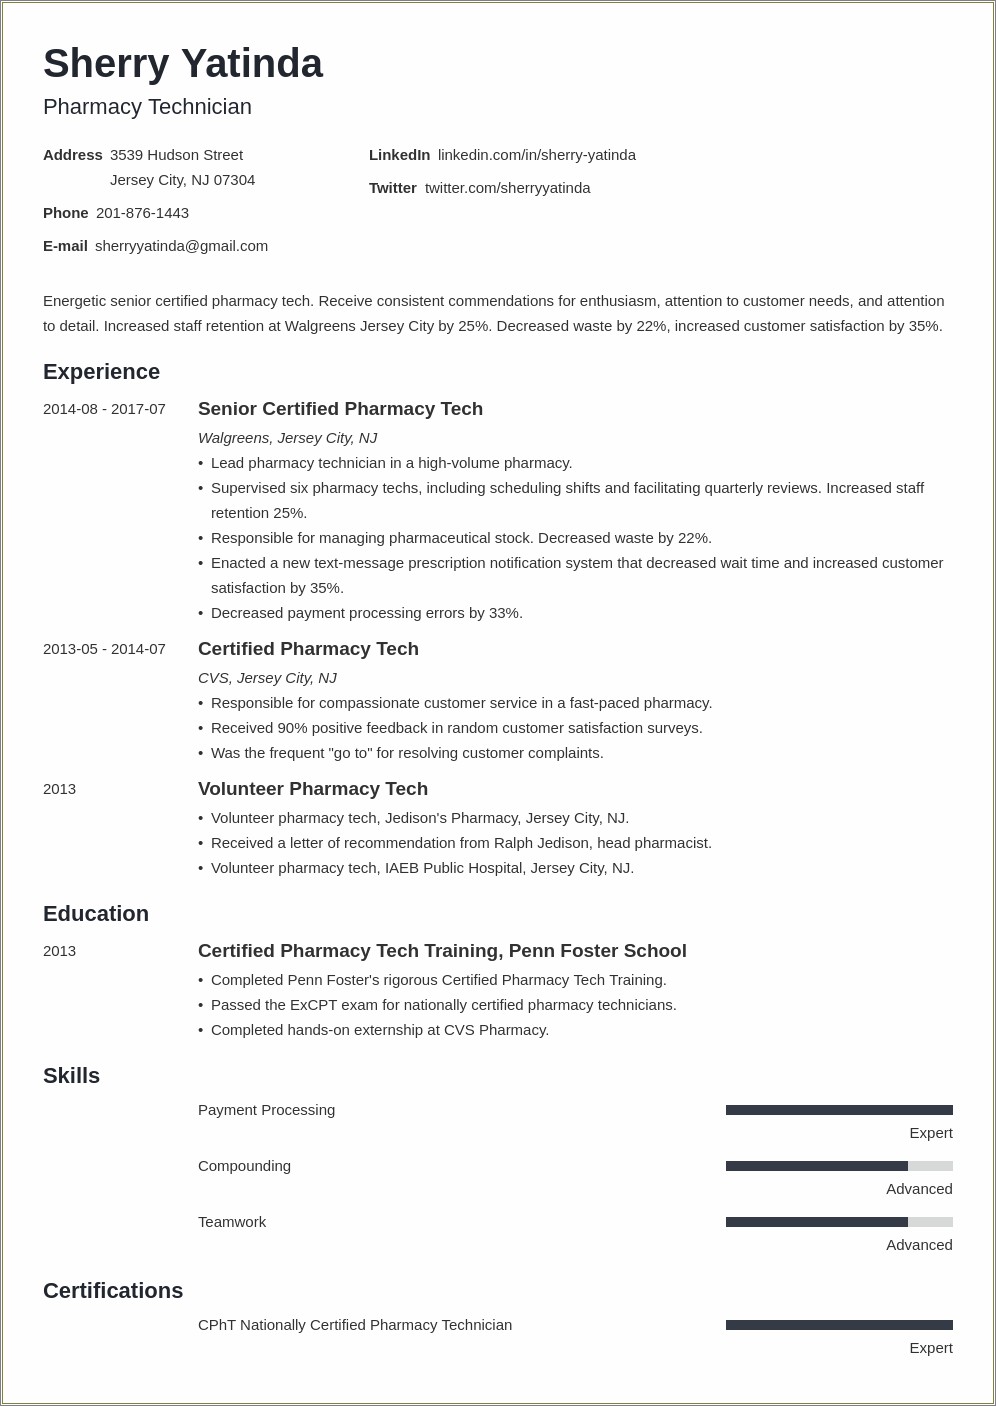 Resume Objective For Pharmacy Technician With No Experience